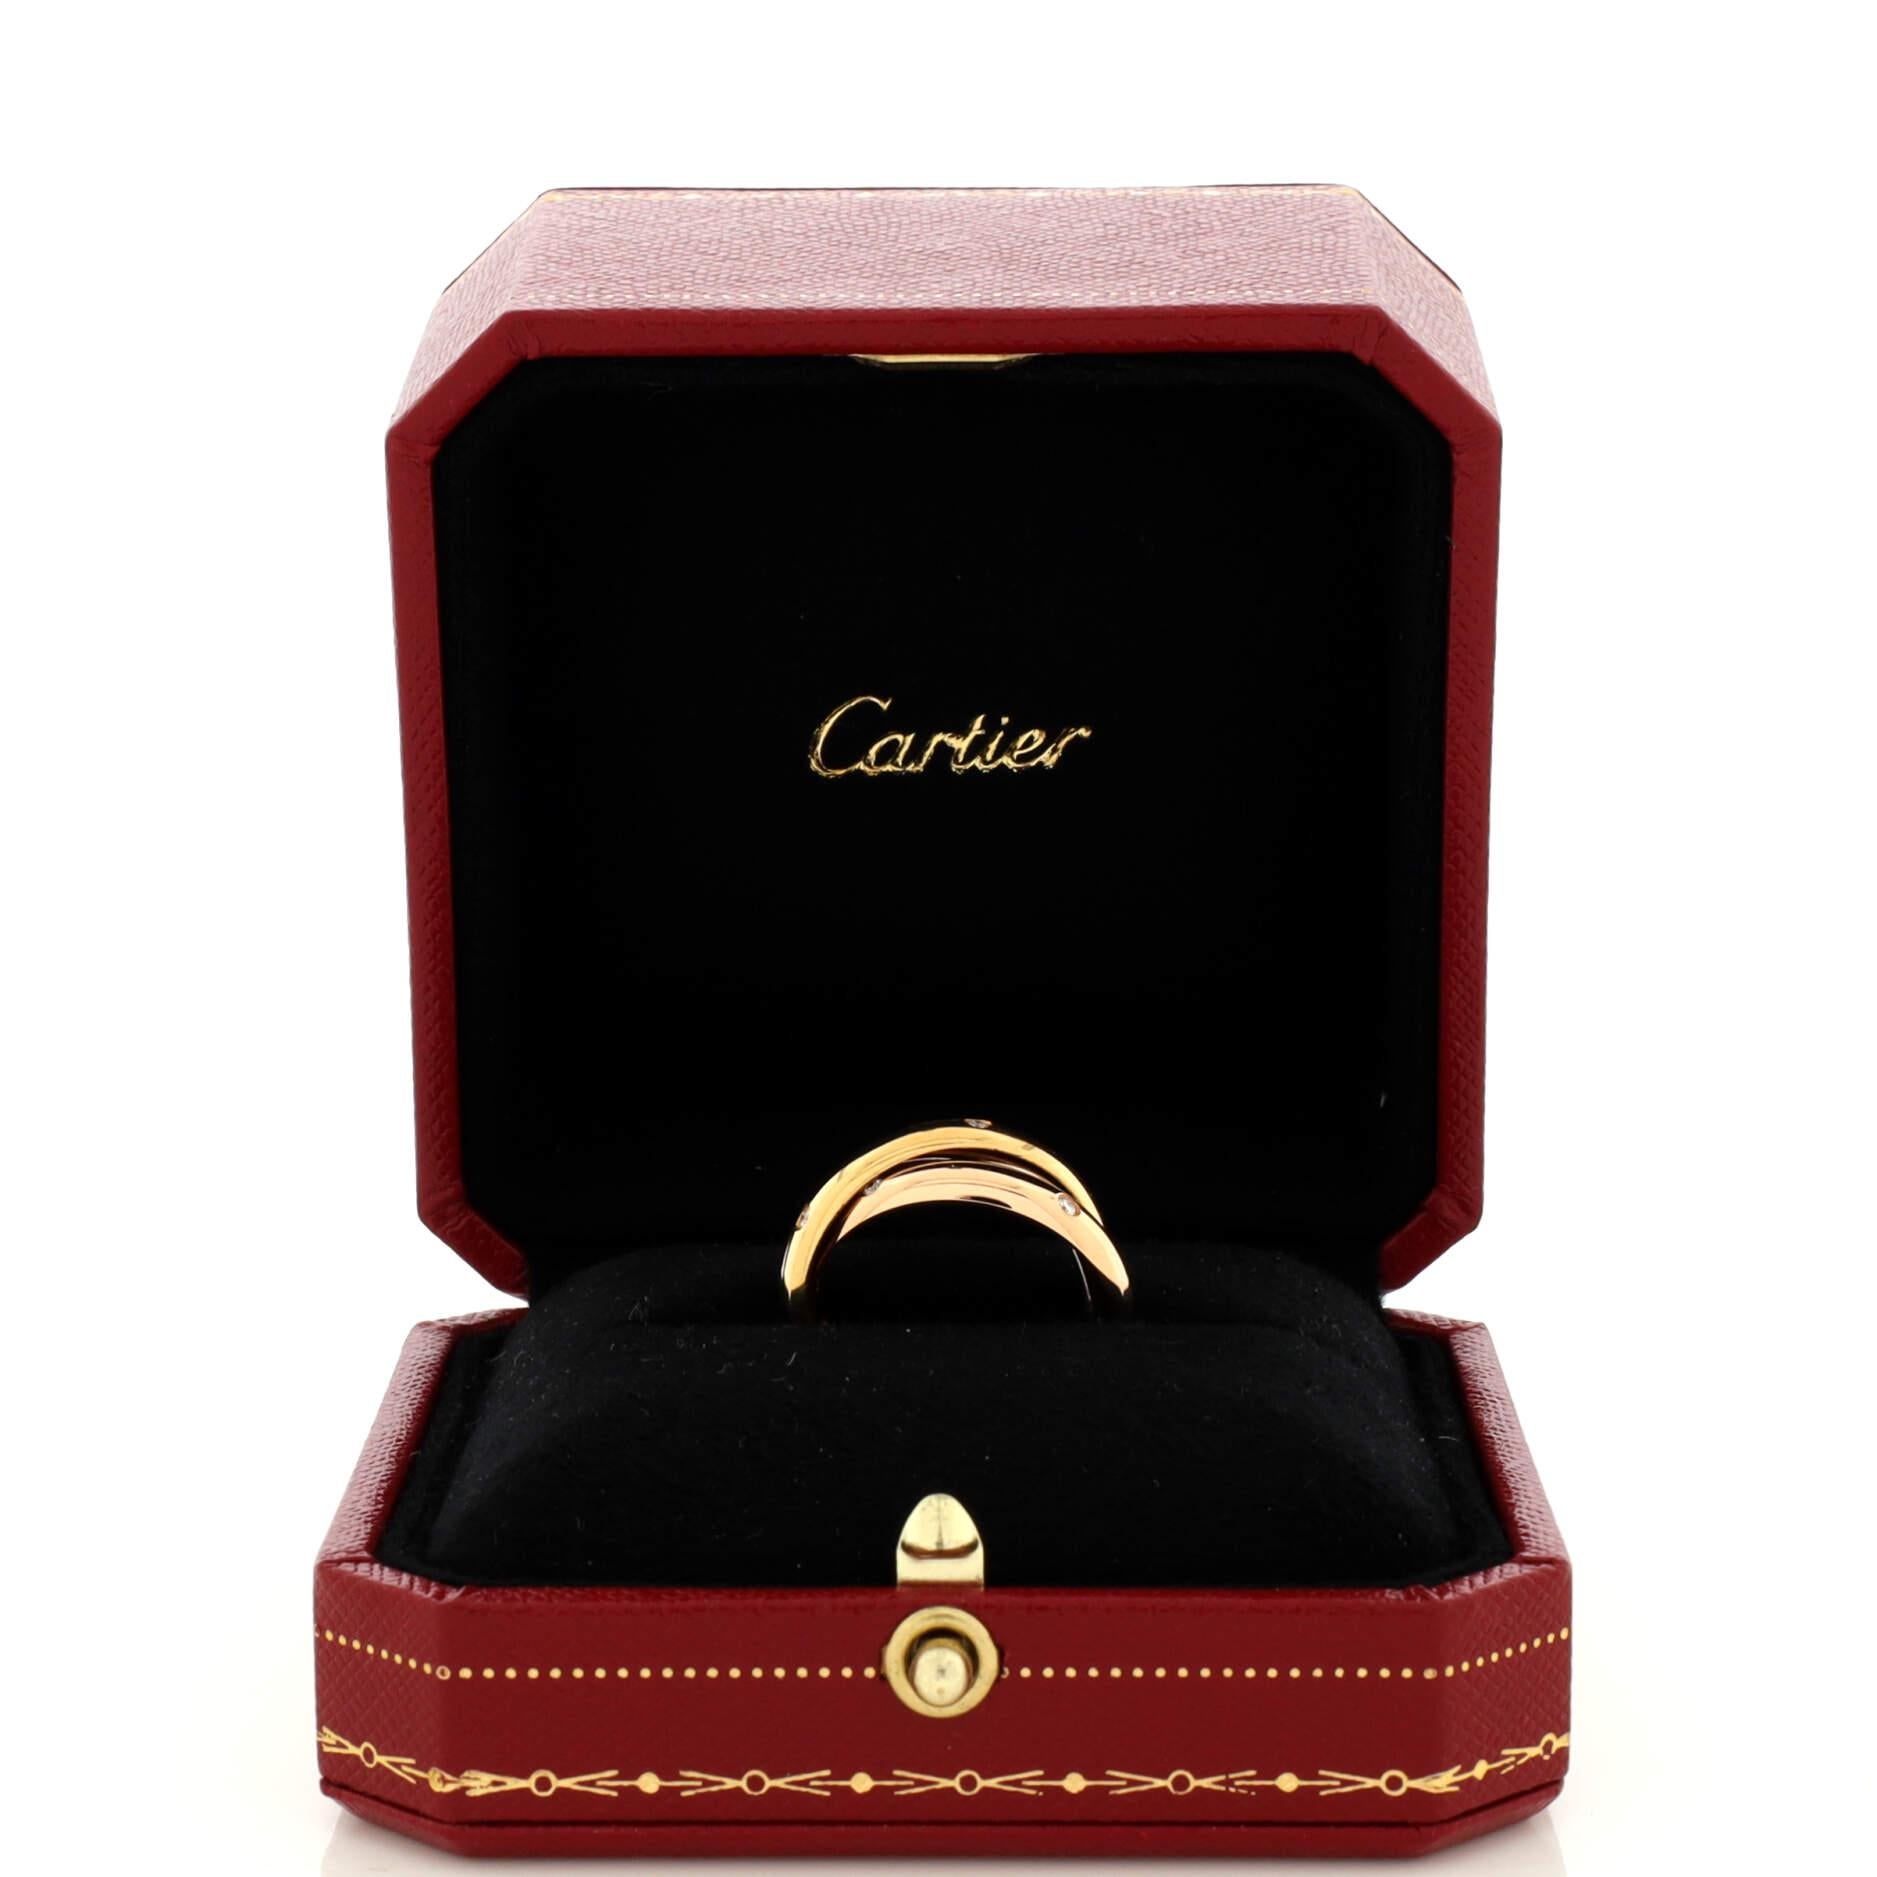 Condition: Great. Minor wear throughout.
Accessories: No Accessories
Measurements: Size: 6.25 - 53, Width: 4.00 mm
Designer: Cartier
Model: 15 Diamond Trinity Ring 18K Tricolor Gold with Diamonds
Exterior Color: Tricolor Gold
Item Number: 215480/60